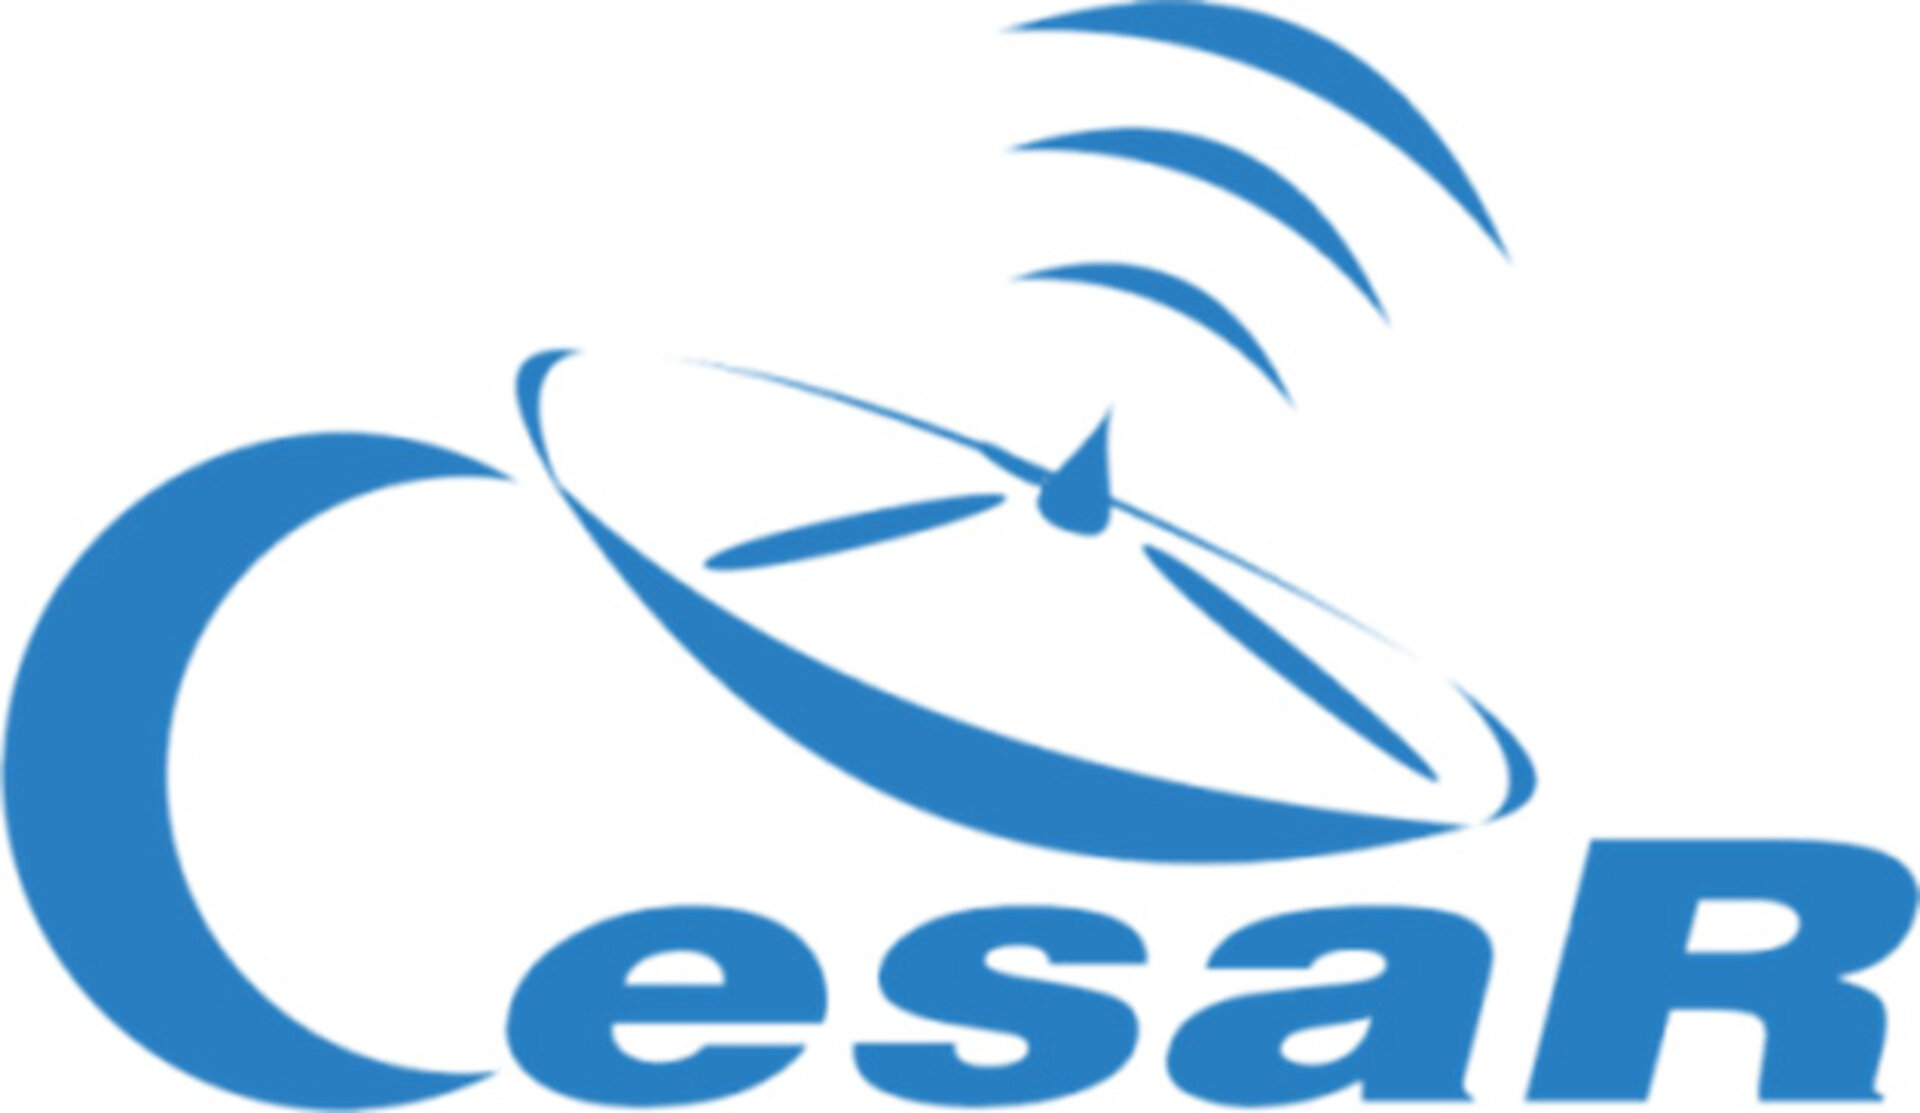 CESAR logo - Cooperation through Education in Science and Astronomy Research